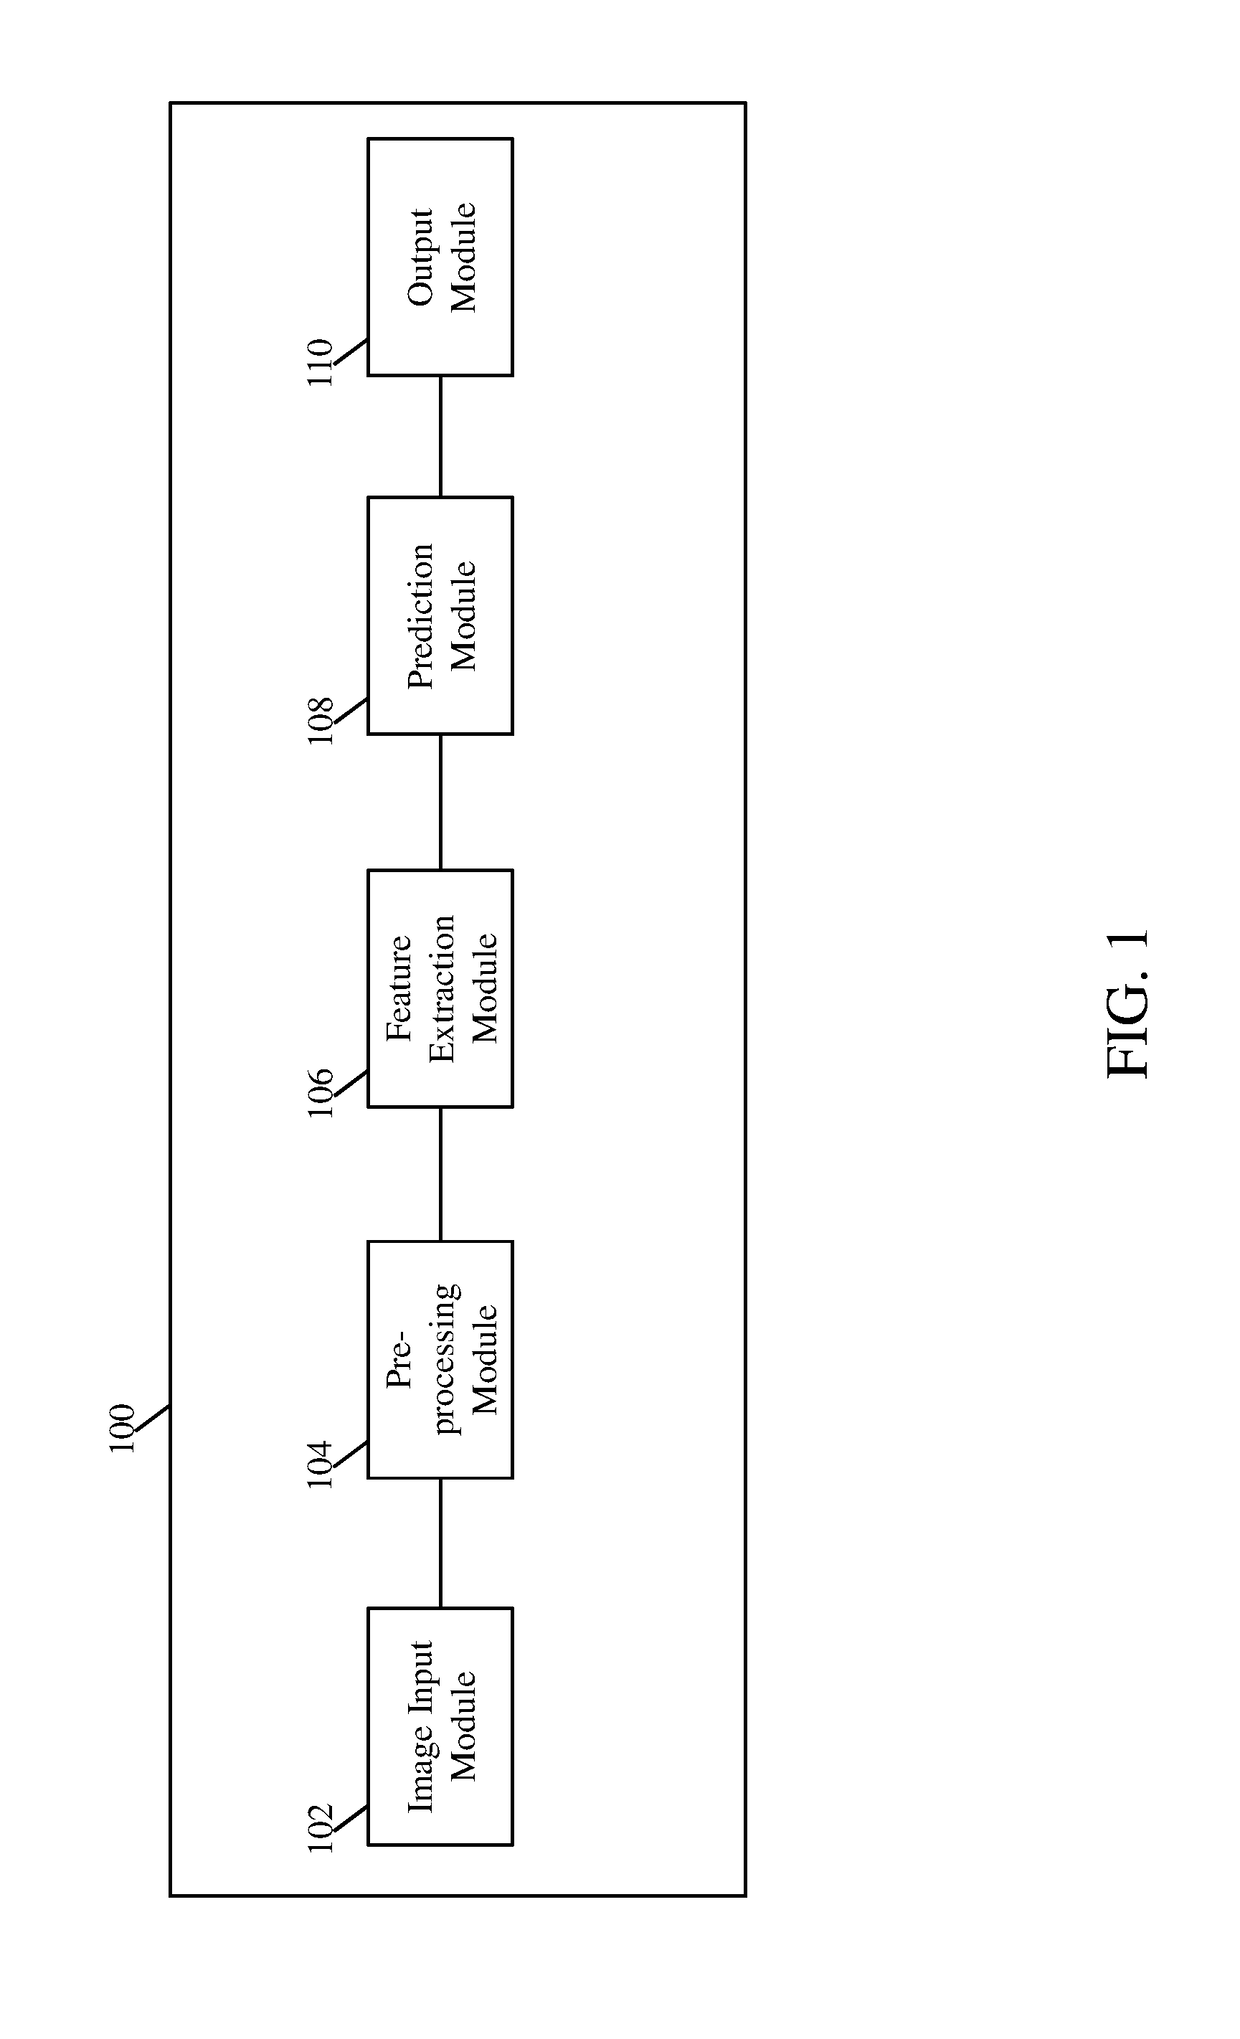 System and method for detecting retinopathy